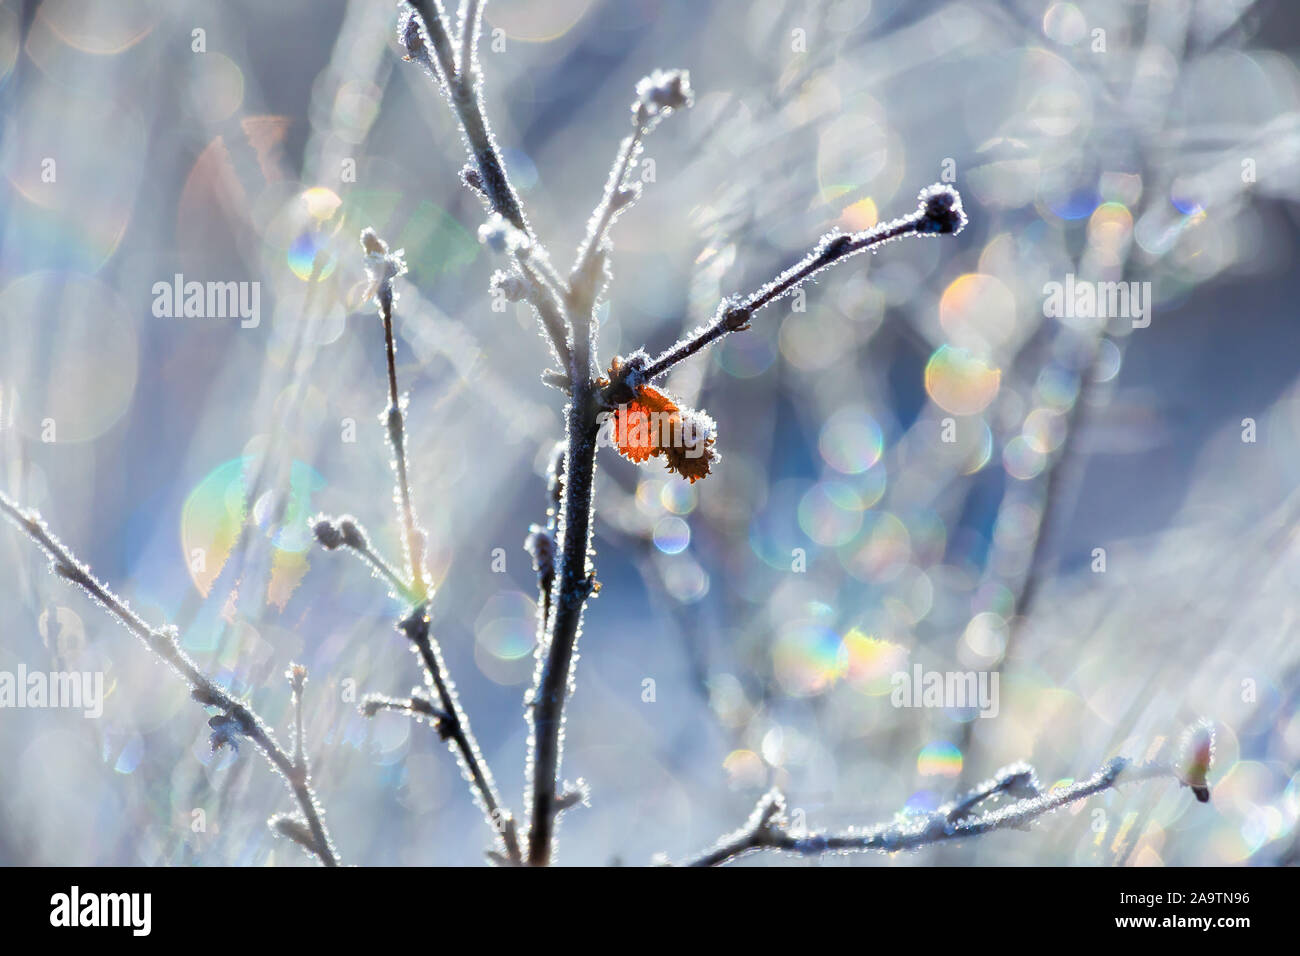 Branches and a red autumn leaf covered with hoarfrost, against a blurred background with multi-colored lens flare Stock Photo